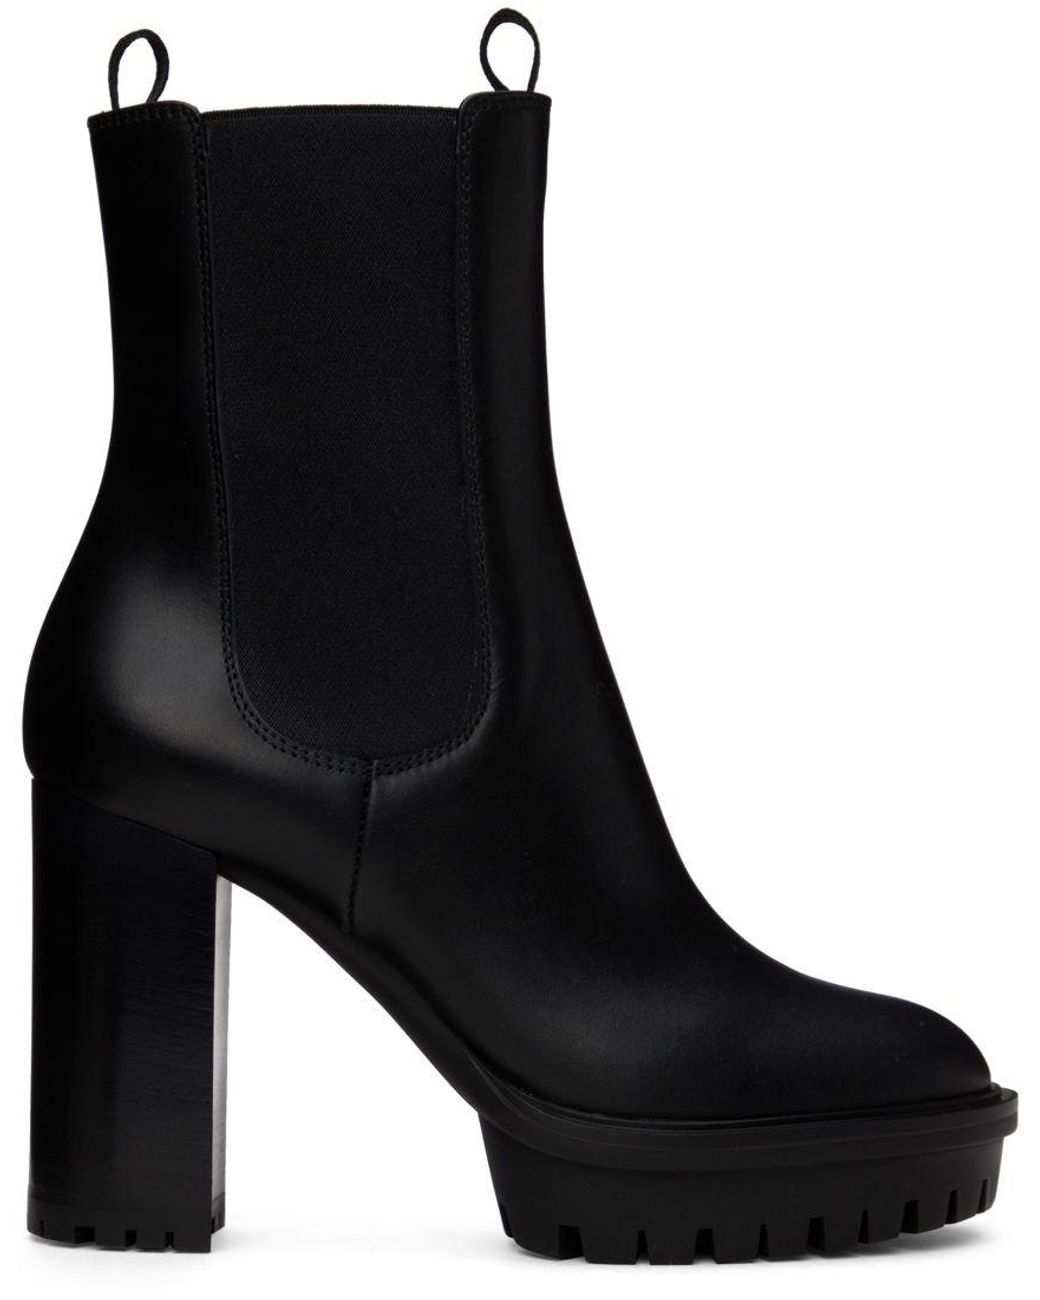 Gianvito Rossi Chester 70 Chelsea Boots in Black | Lyst